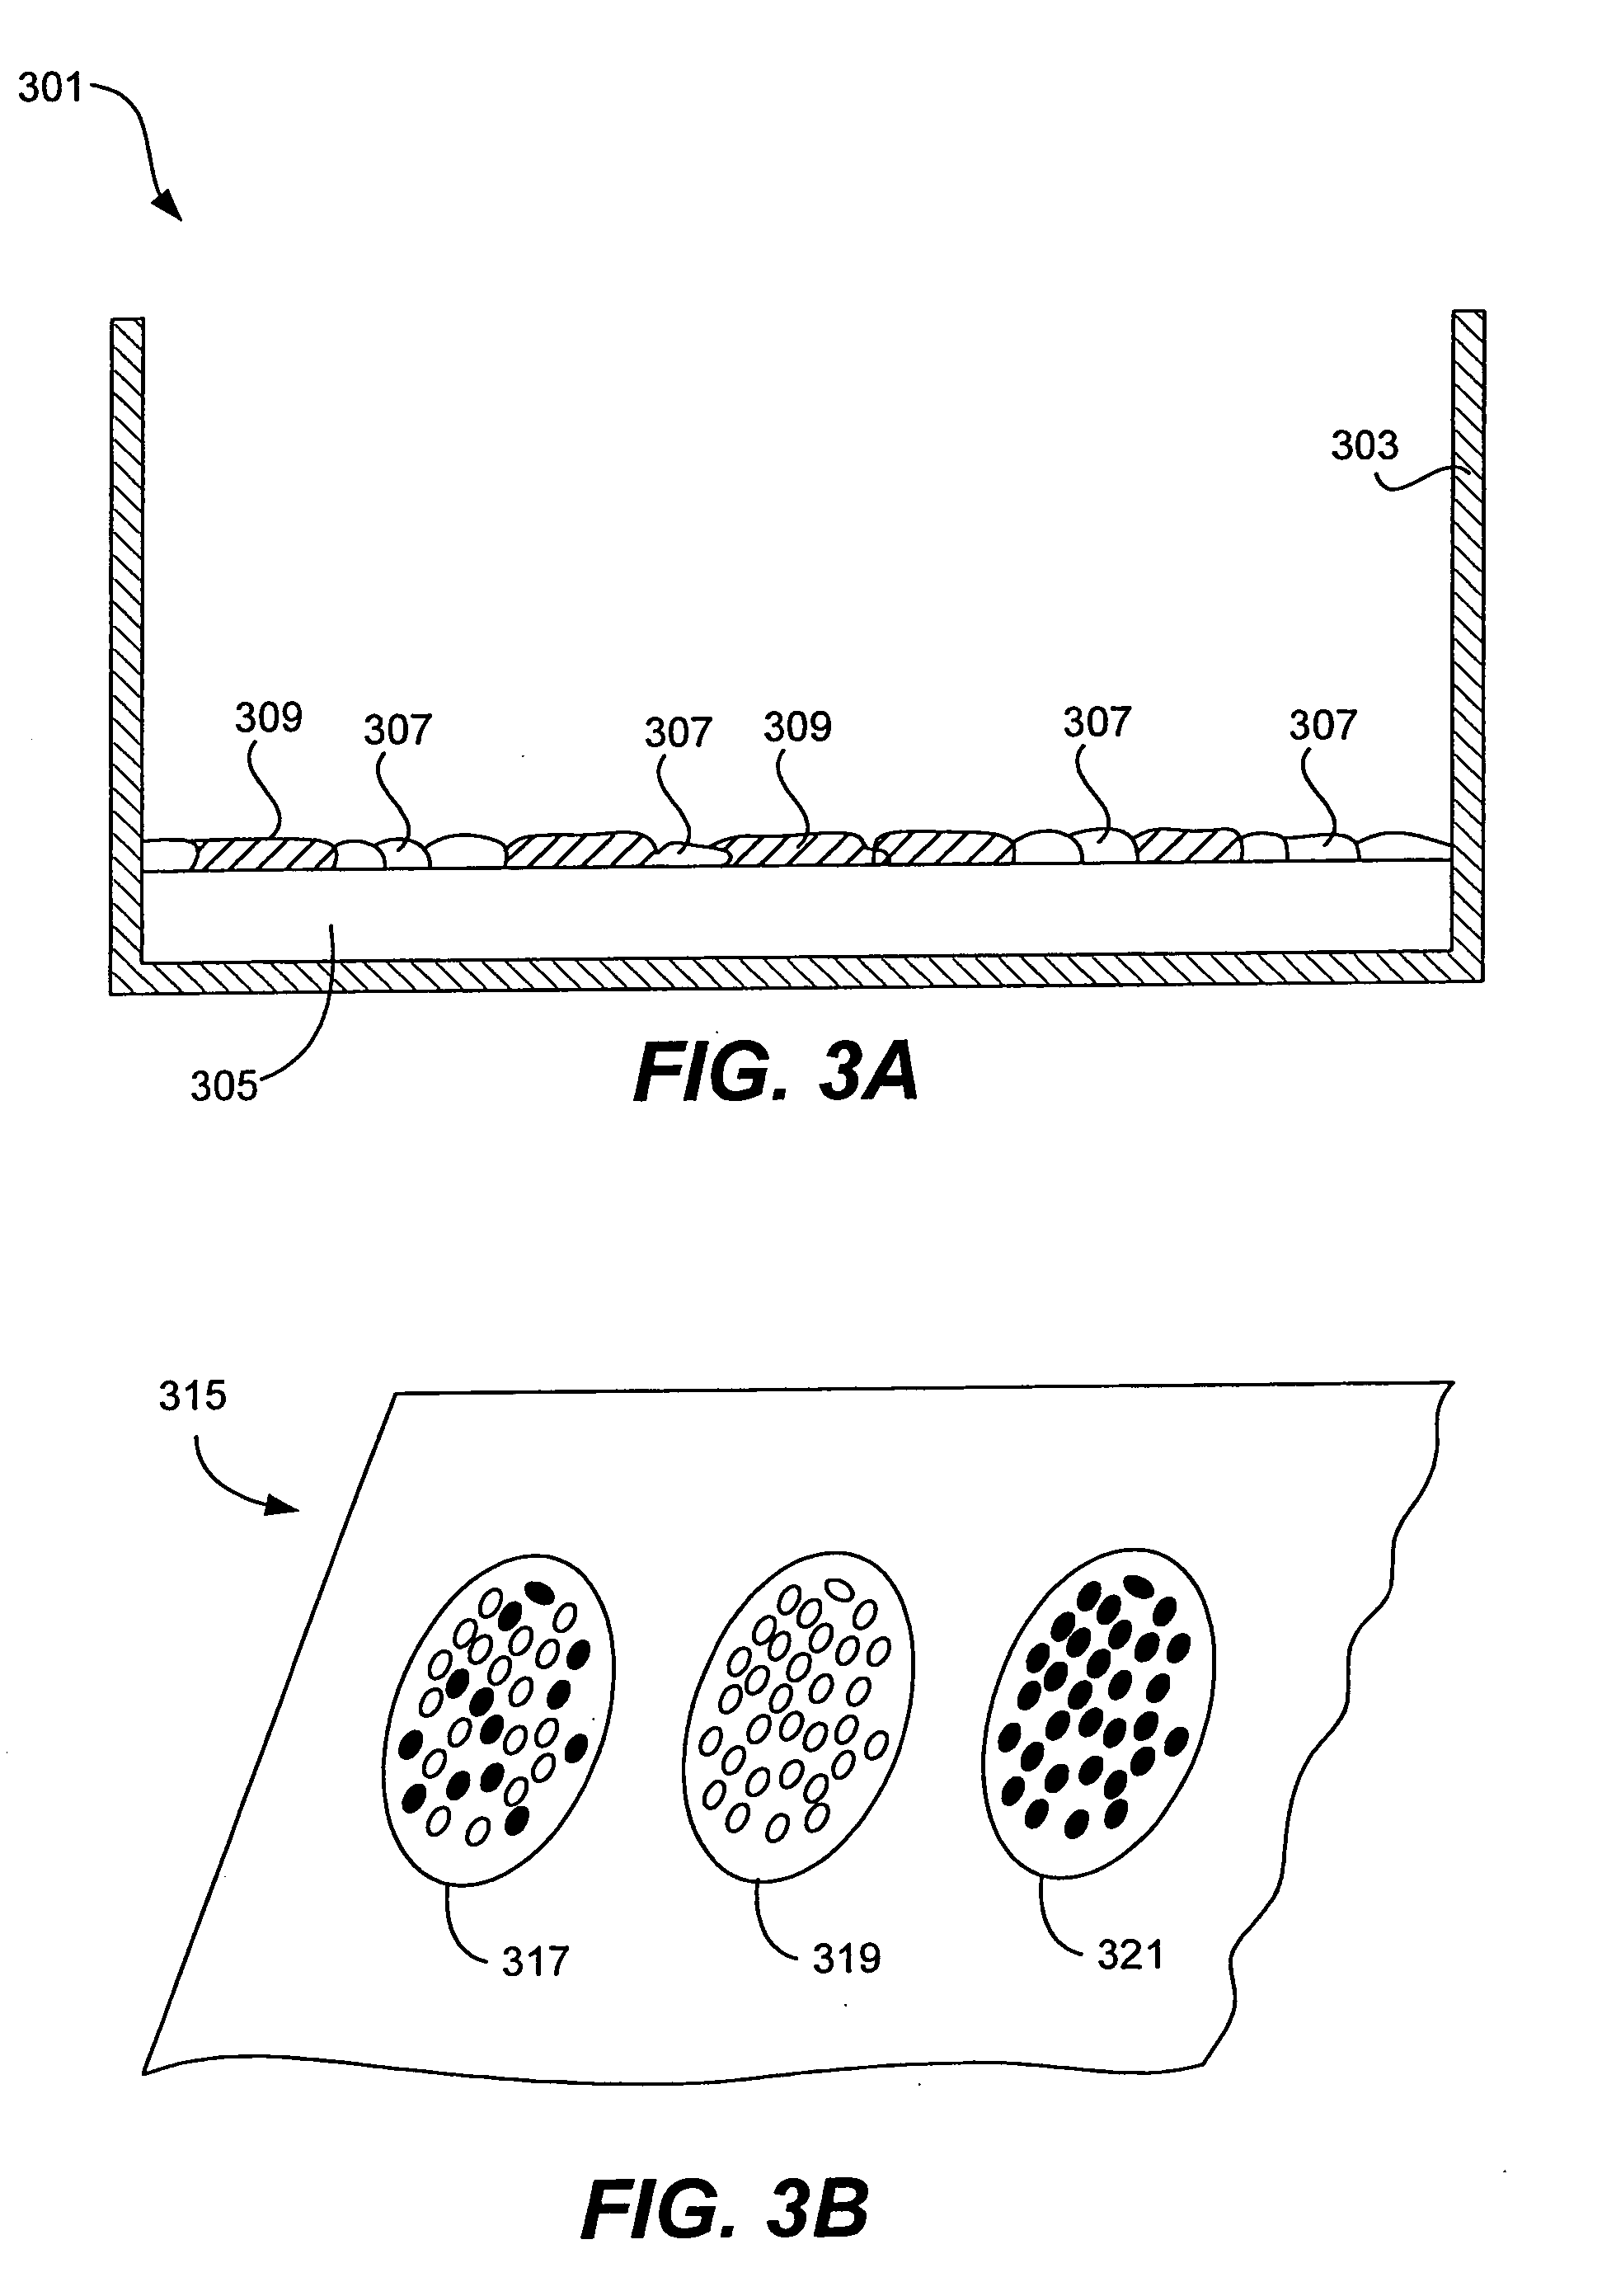 Method of characterizing potential therapeutics by determining cell-cell interactions